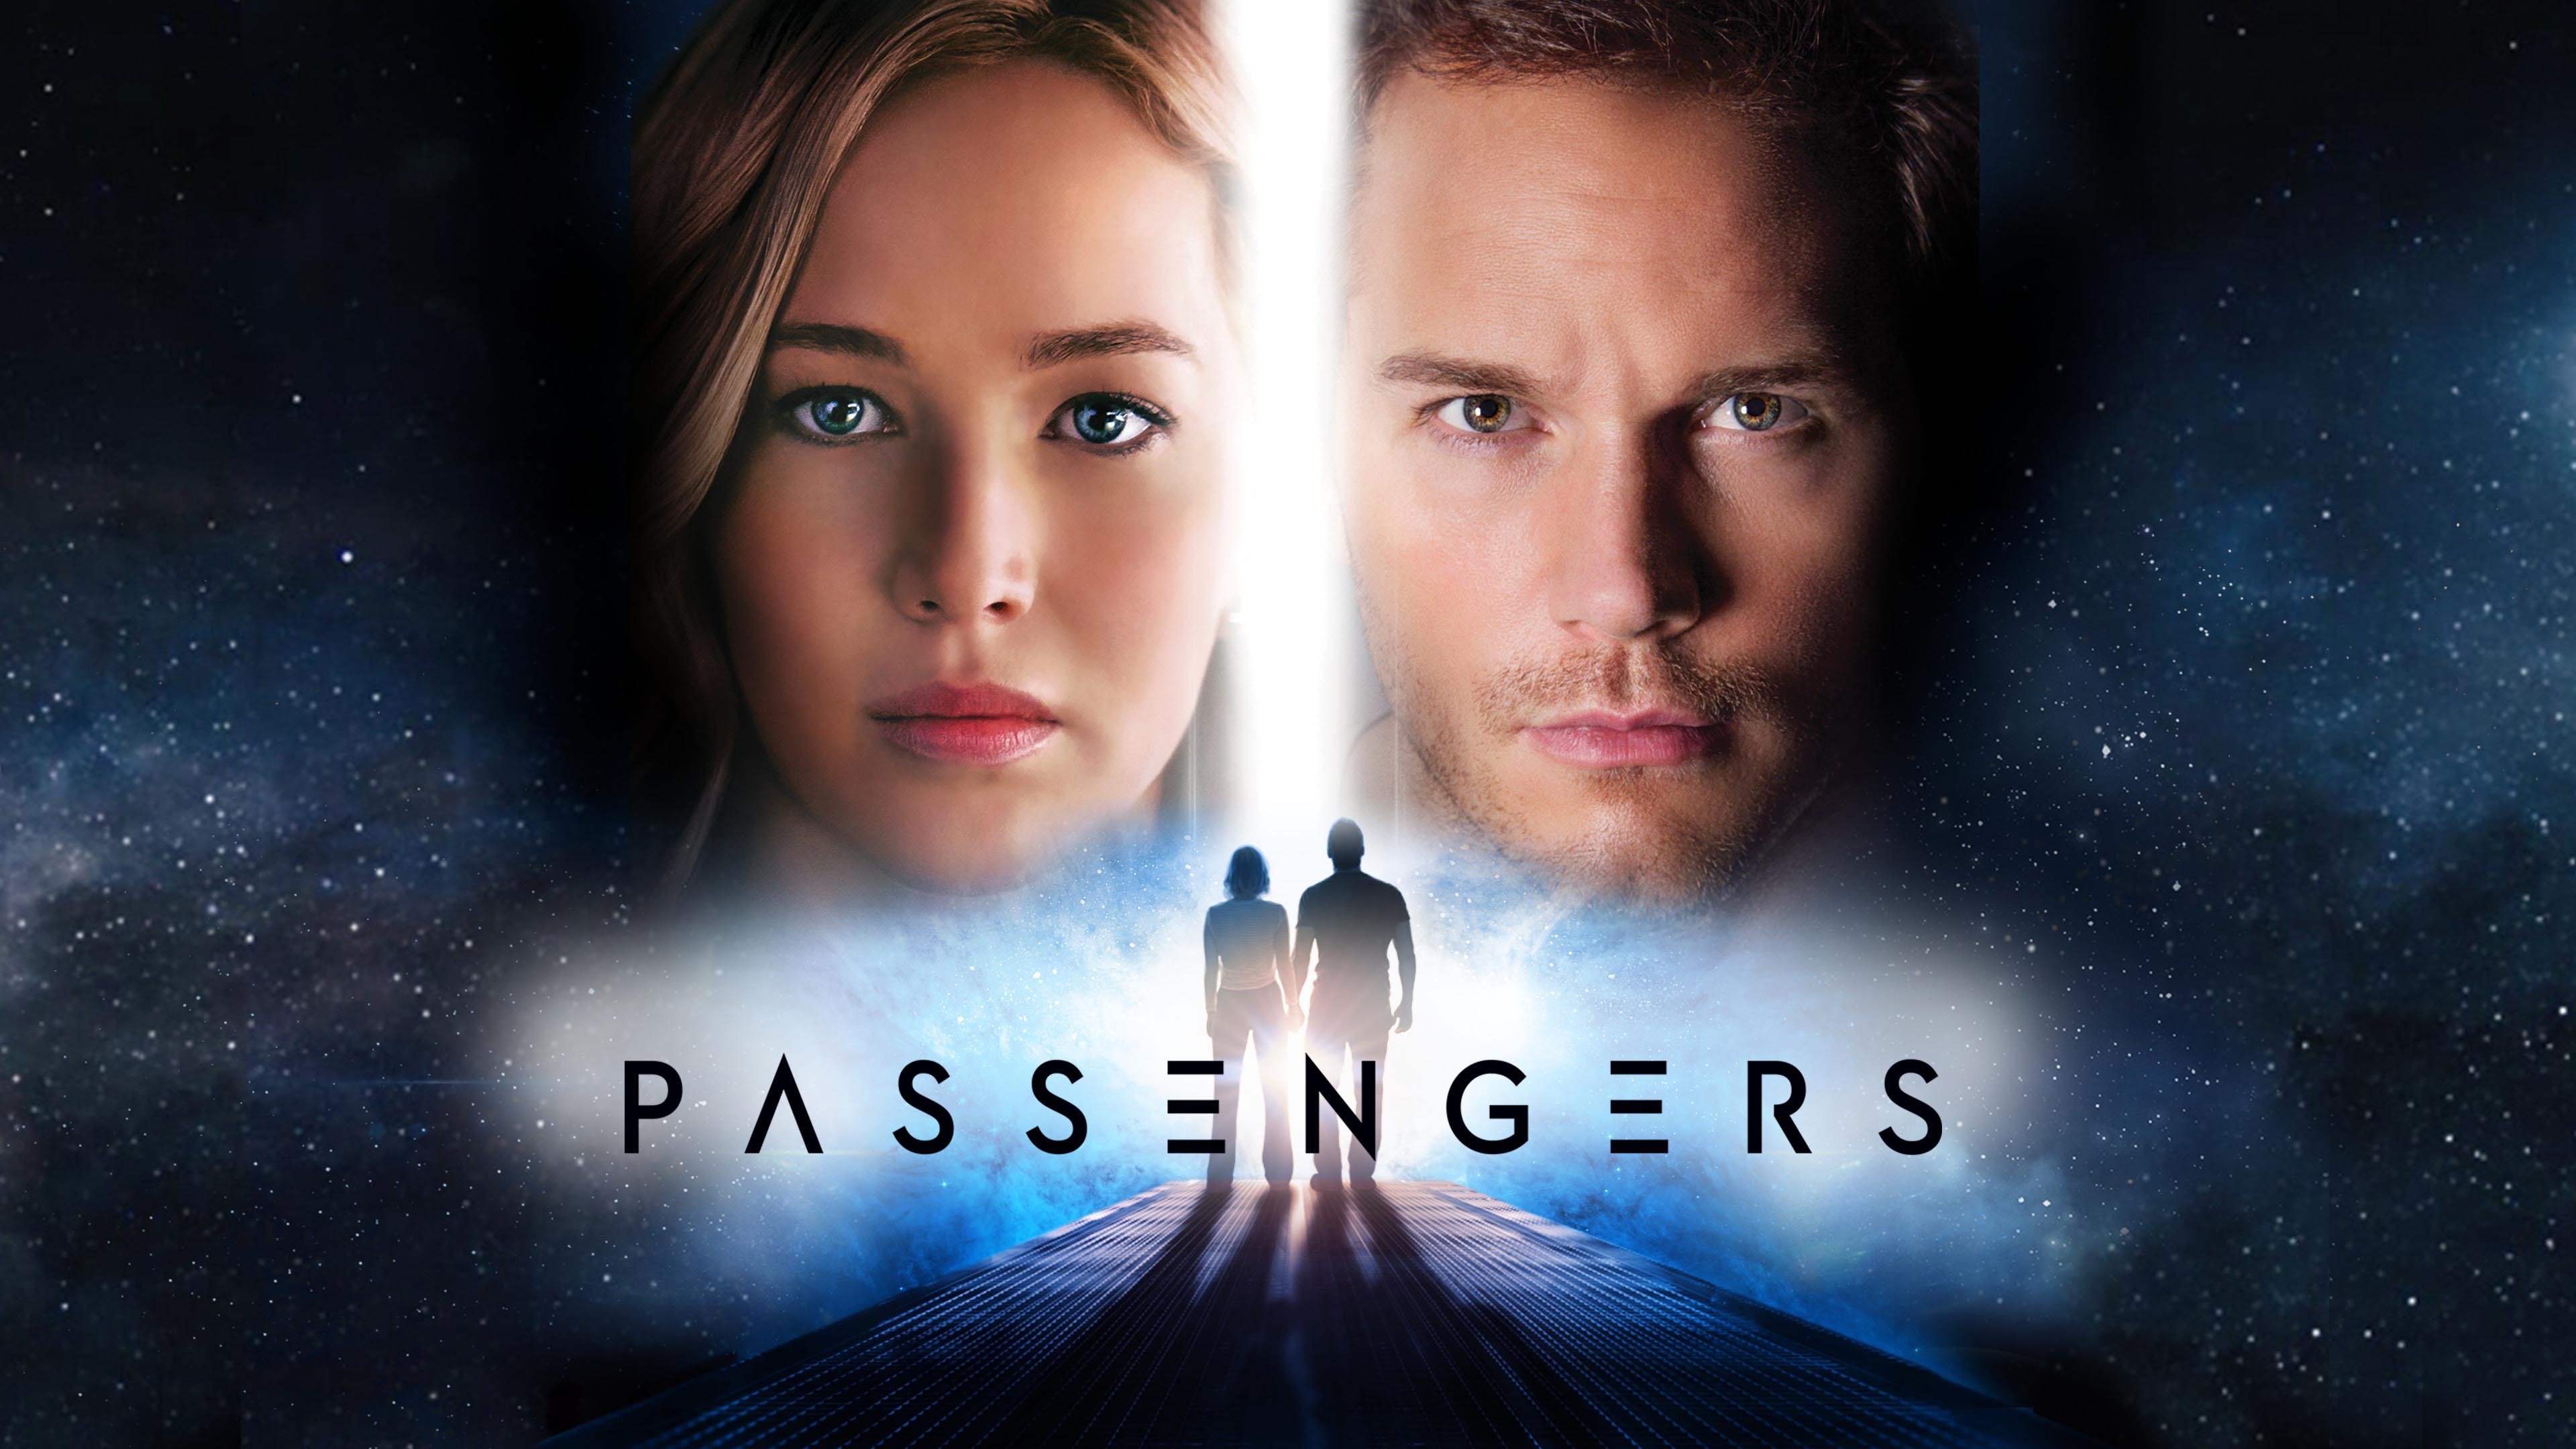 Passengers: Trailer 1 - Trailers & Videos - Rotten Tomatoes